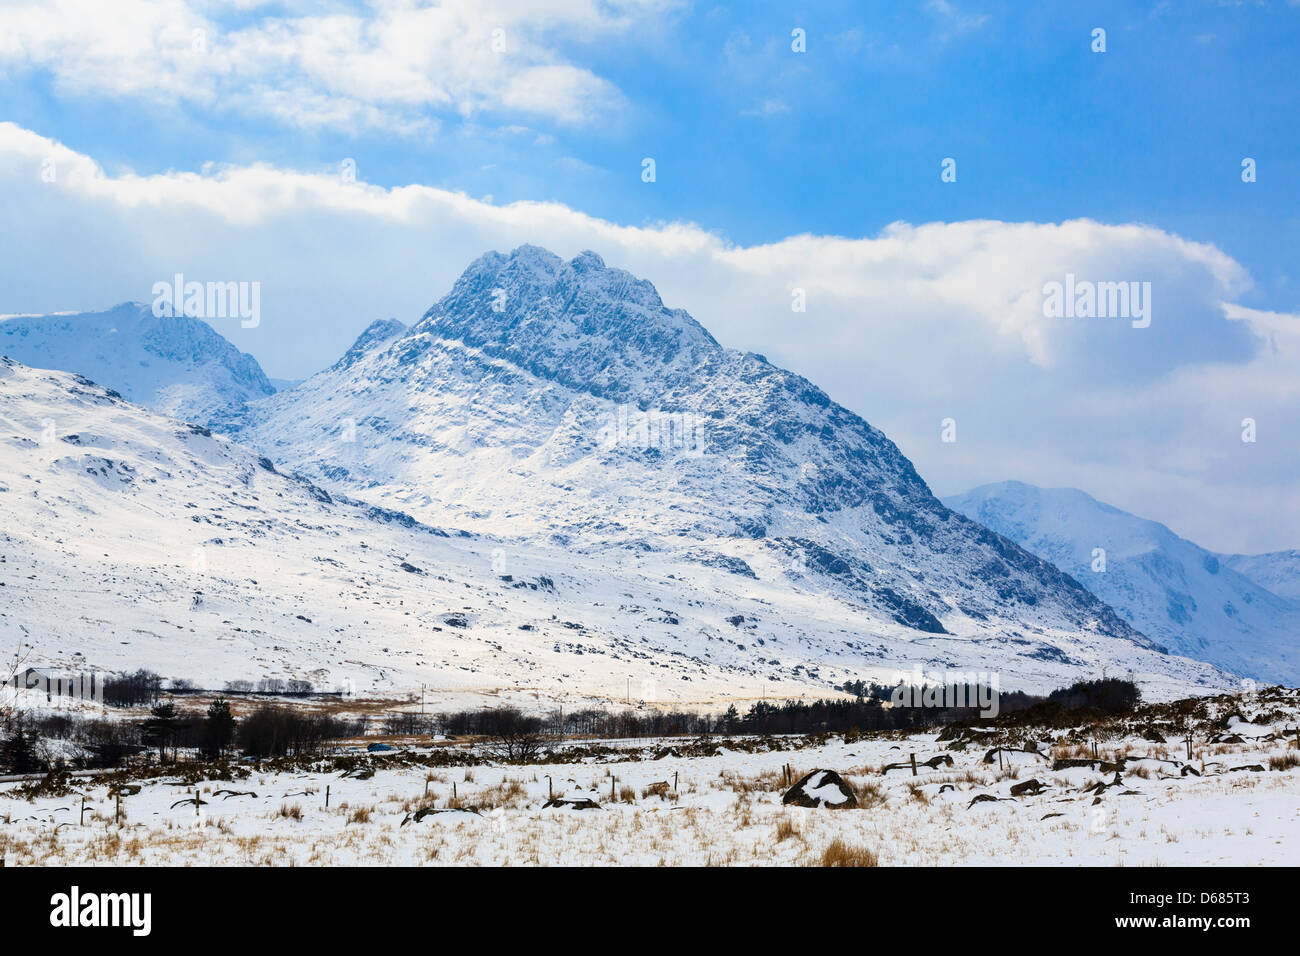 Wintry view to Mount Tryfan mountain east face with late snow in spring 2013 in Snowdonia National Park, Ogwen Valley, Conwy, North Wales, UK Stock Photo